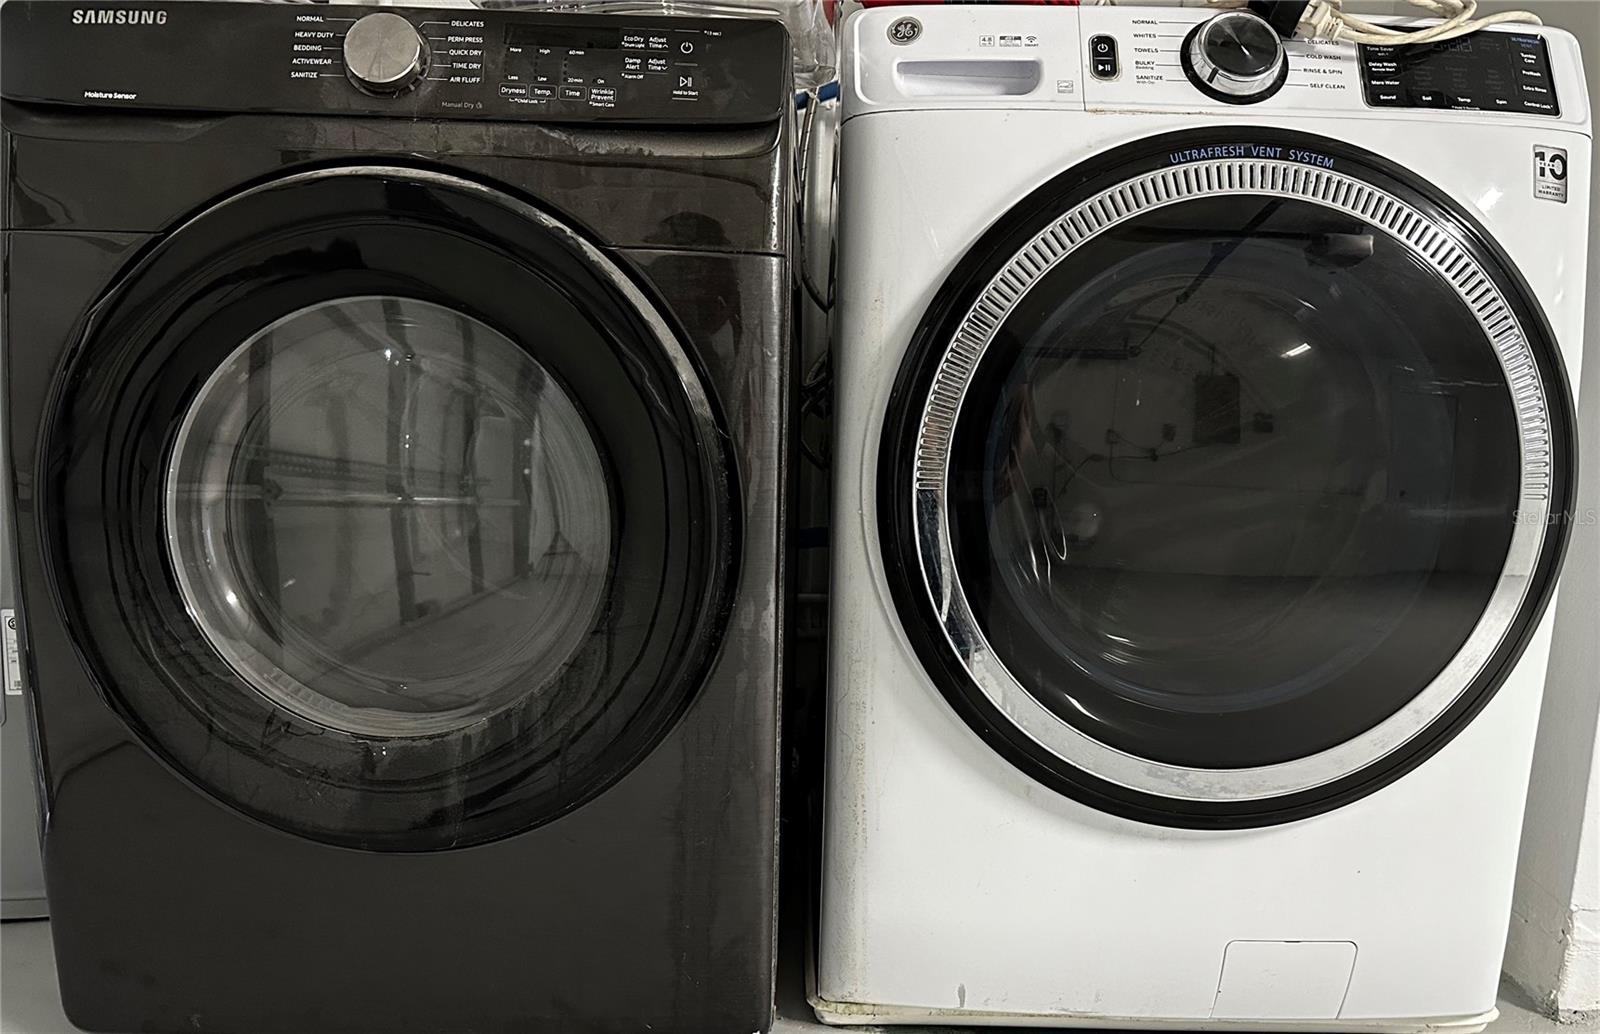 Washer and Dryer convey